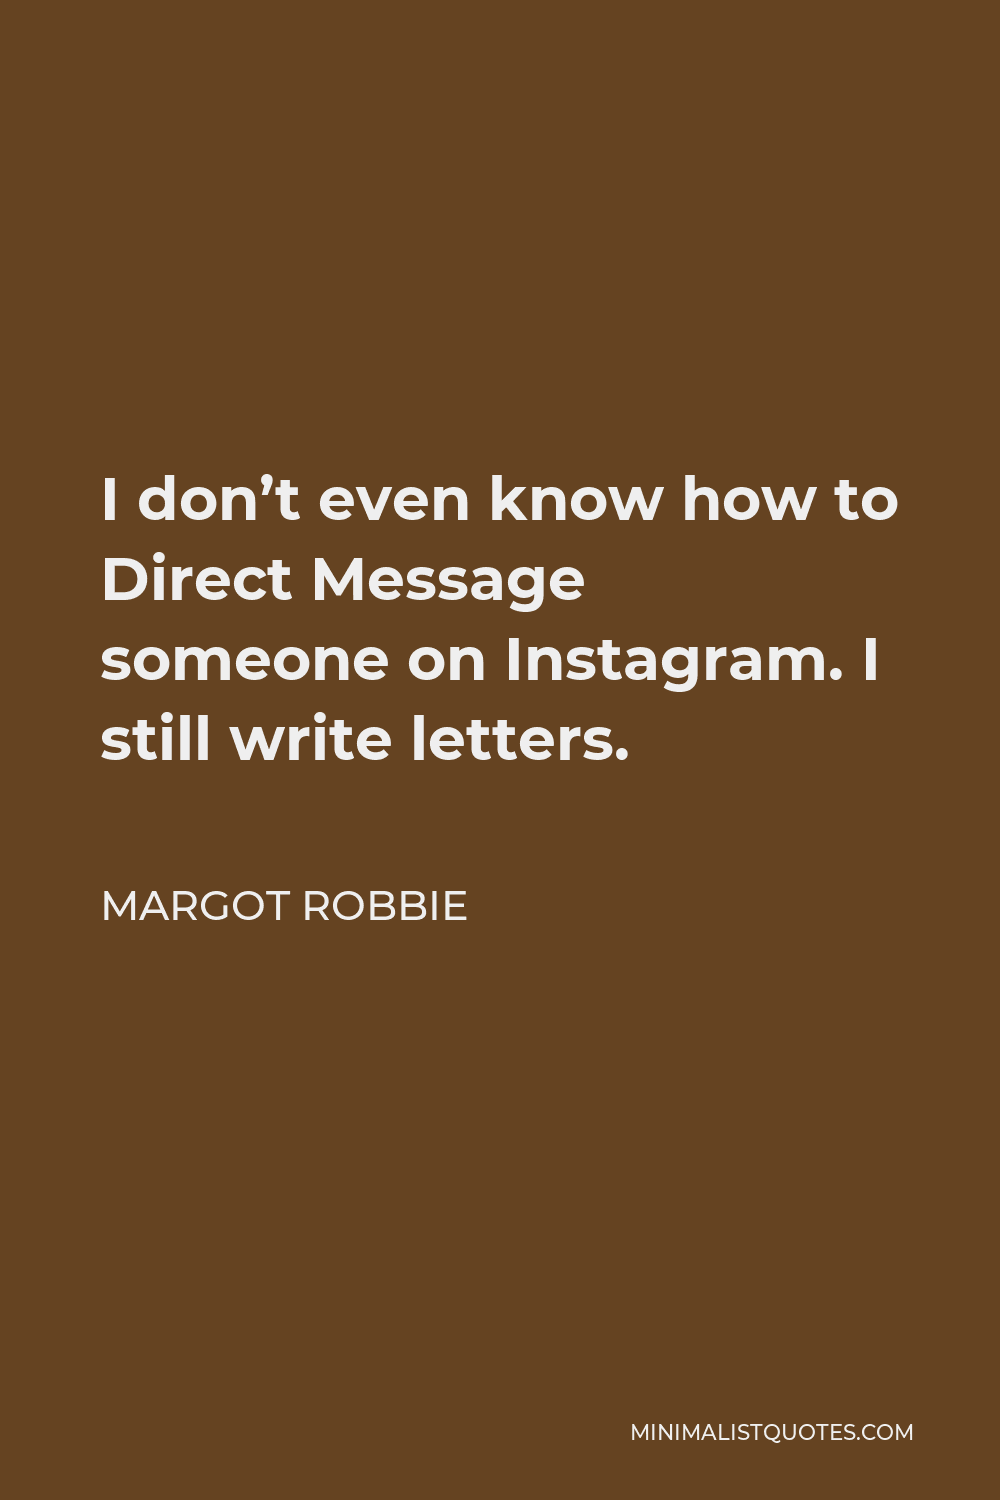 Margot Robbie Quote - I don’t even know how to Direct Message someone on Instagram. I still write letters.